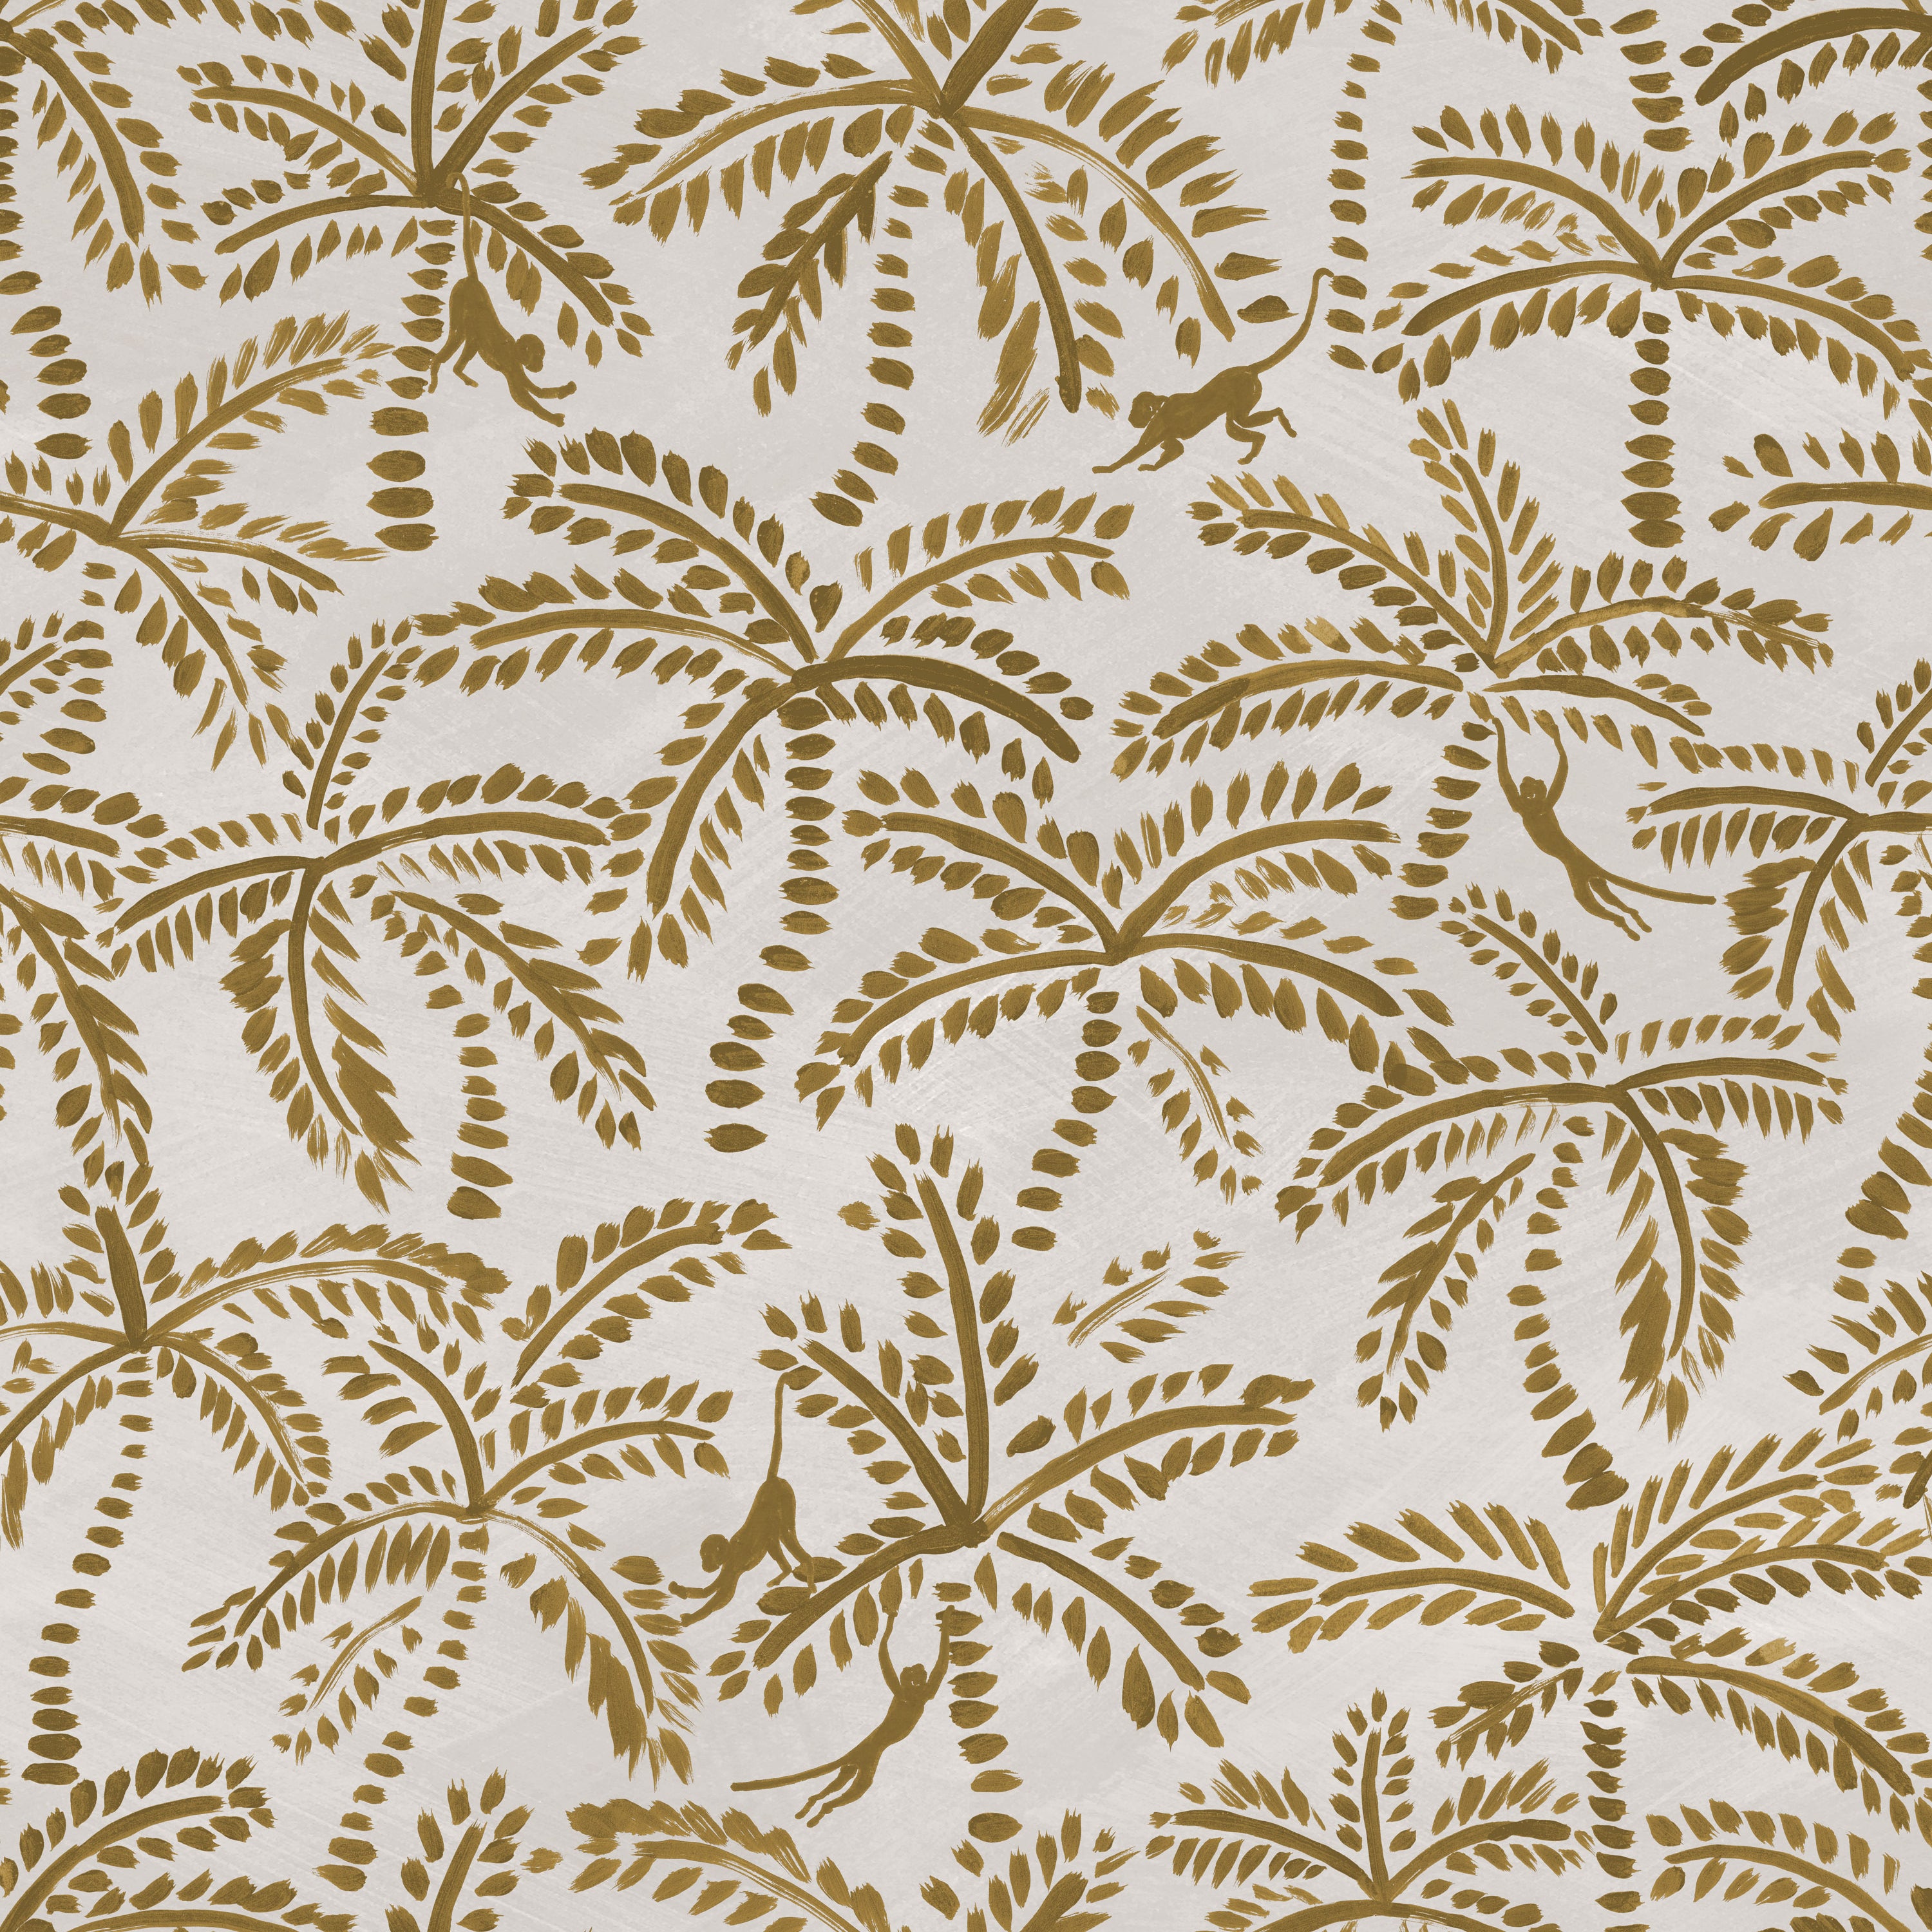 Detail of fabric in a playful palm tree and monkey print in gold on a cream field.